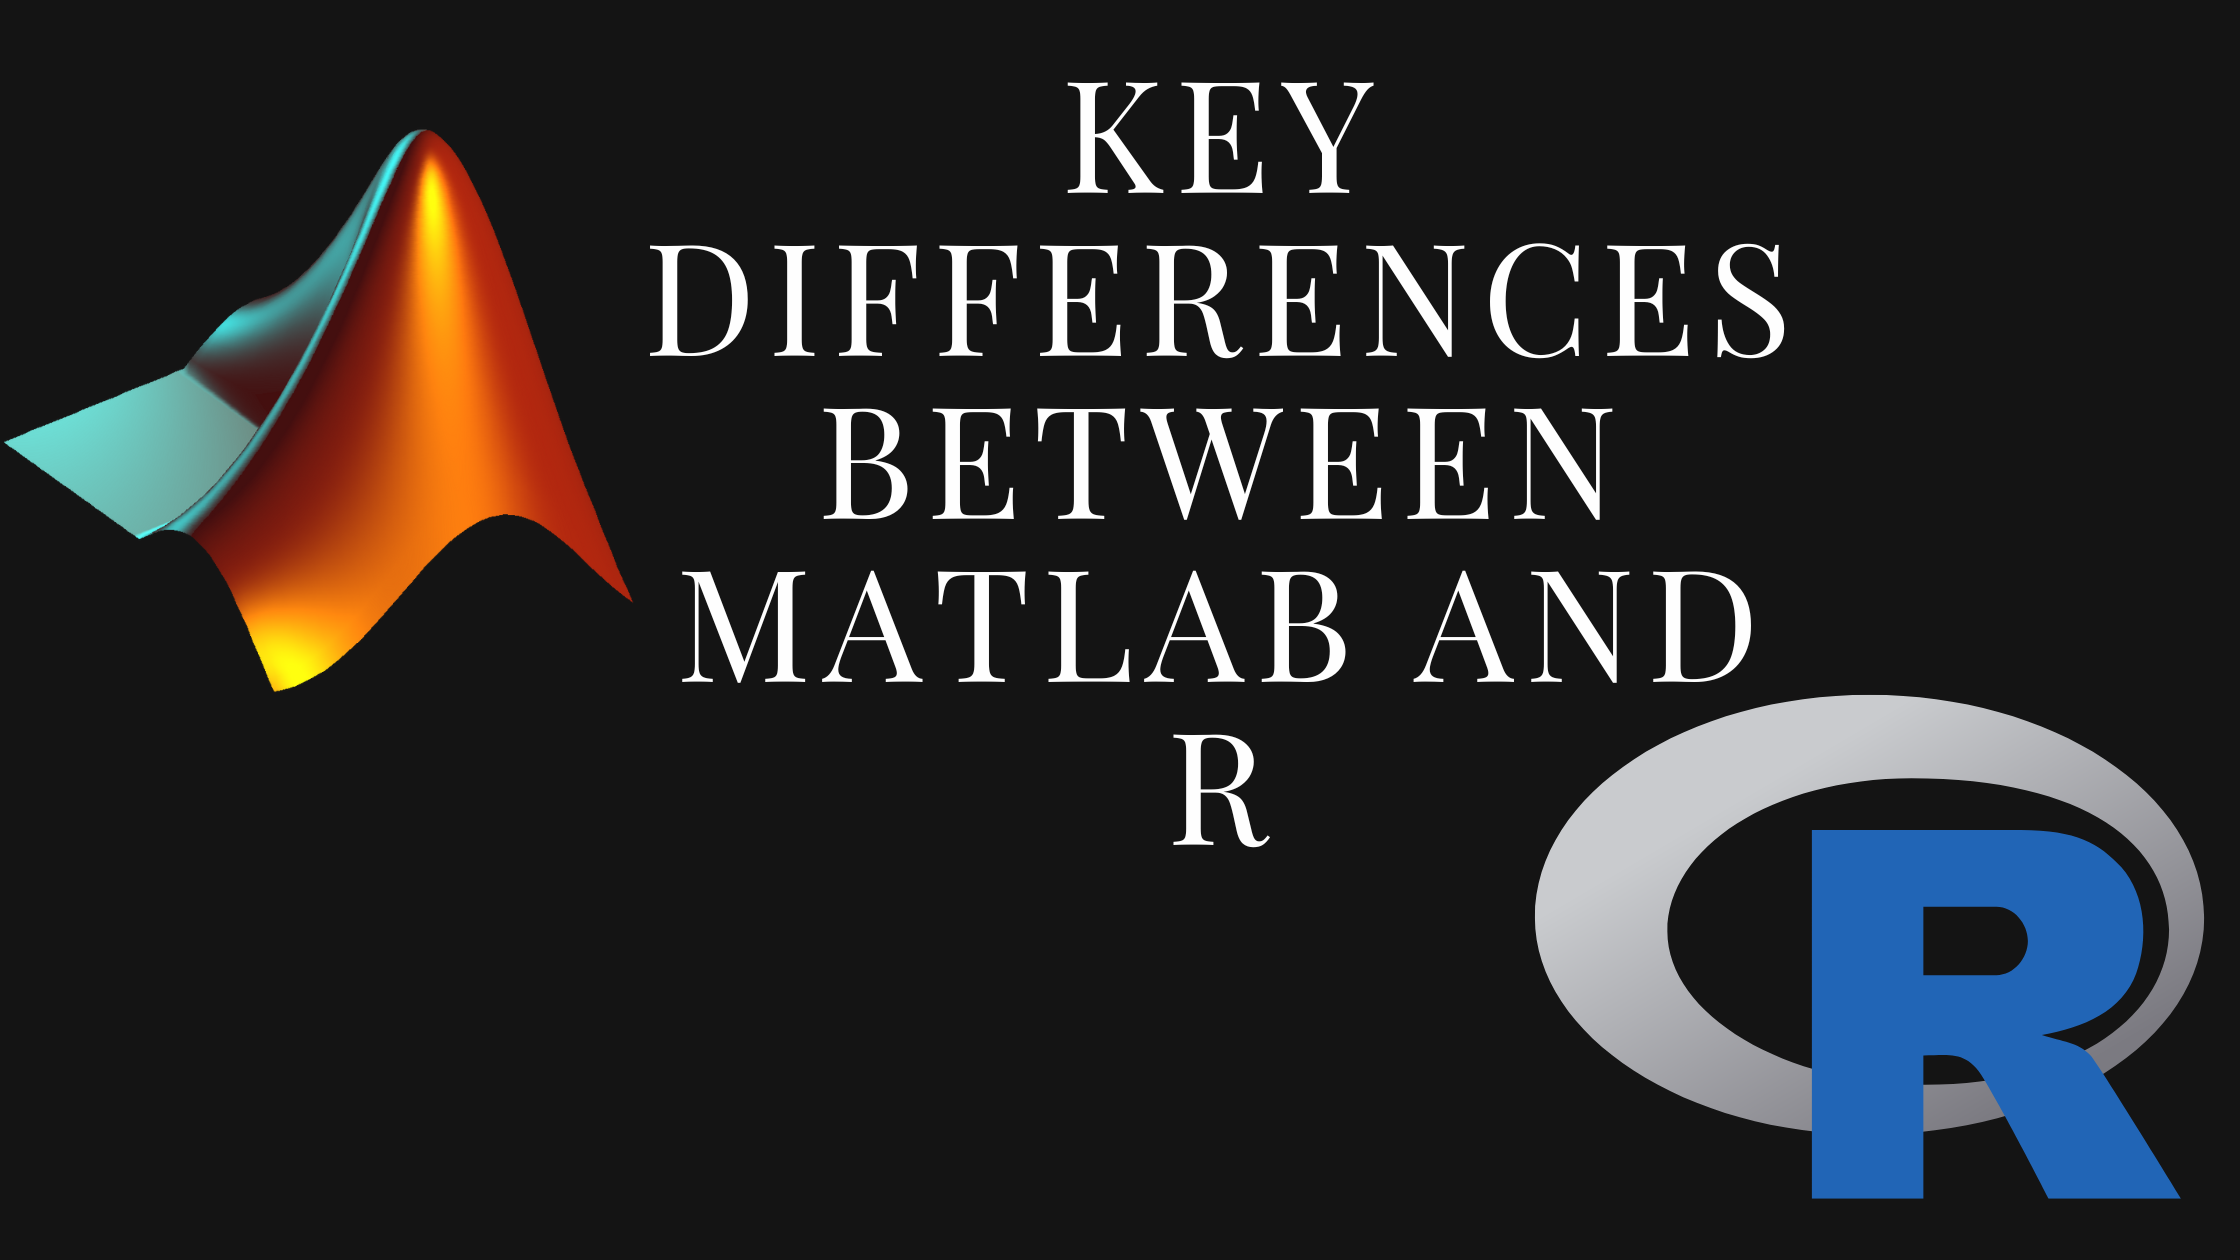 What Are the Key Differences Between Matlab and R?